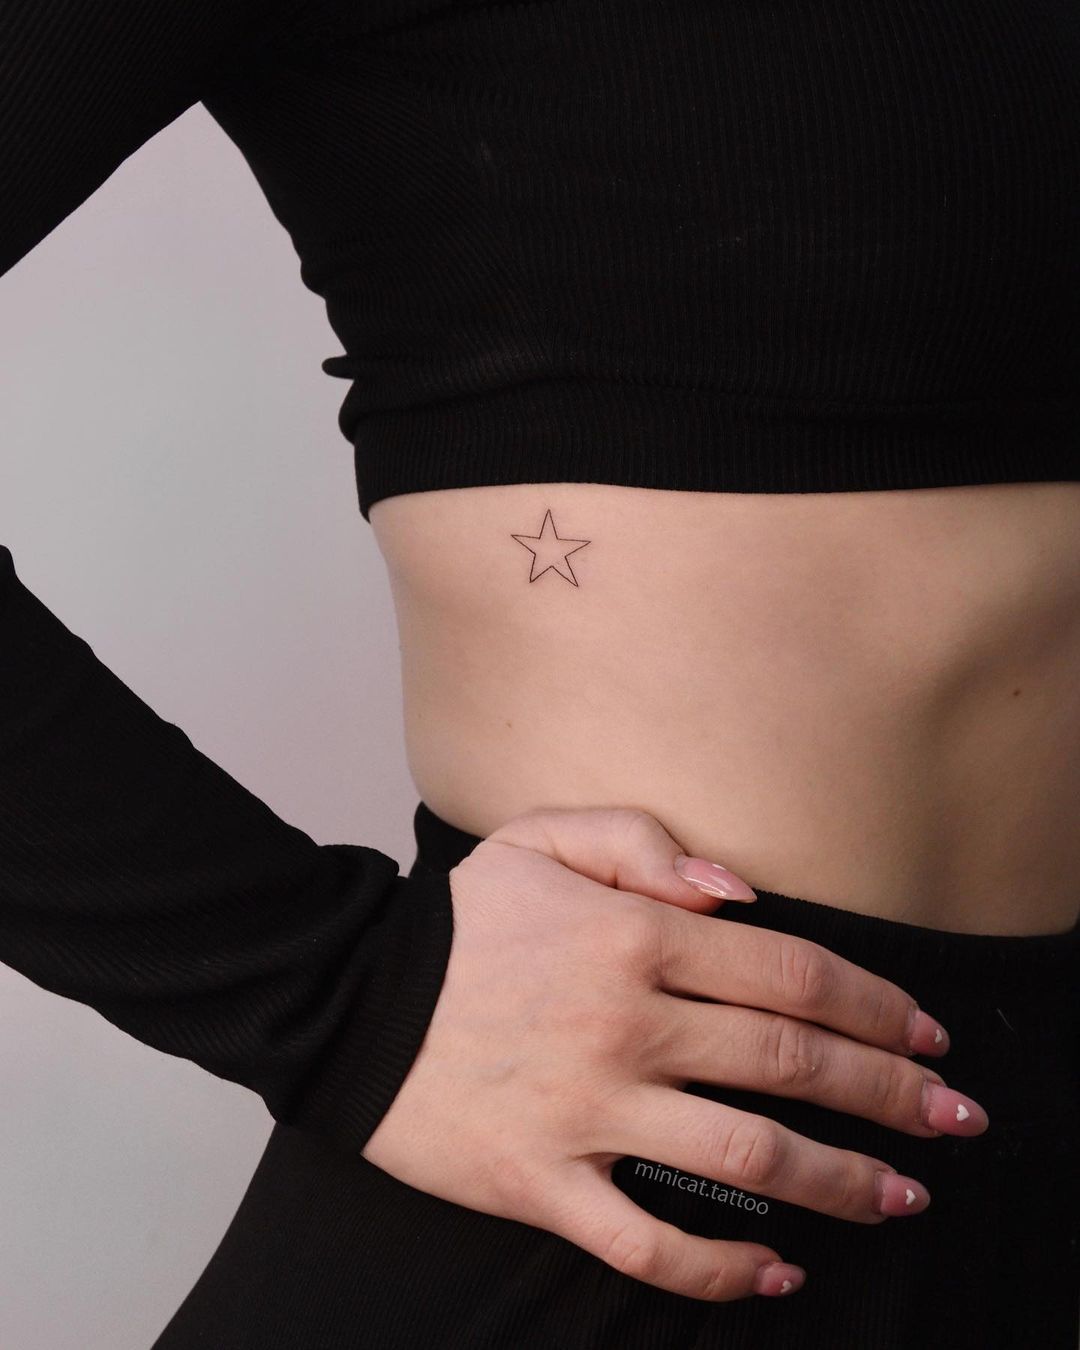 20 Side Boob Tattoo Ideas That Are Equal Parts Chic & Discreet